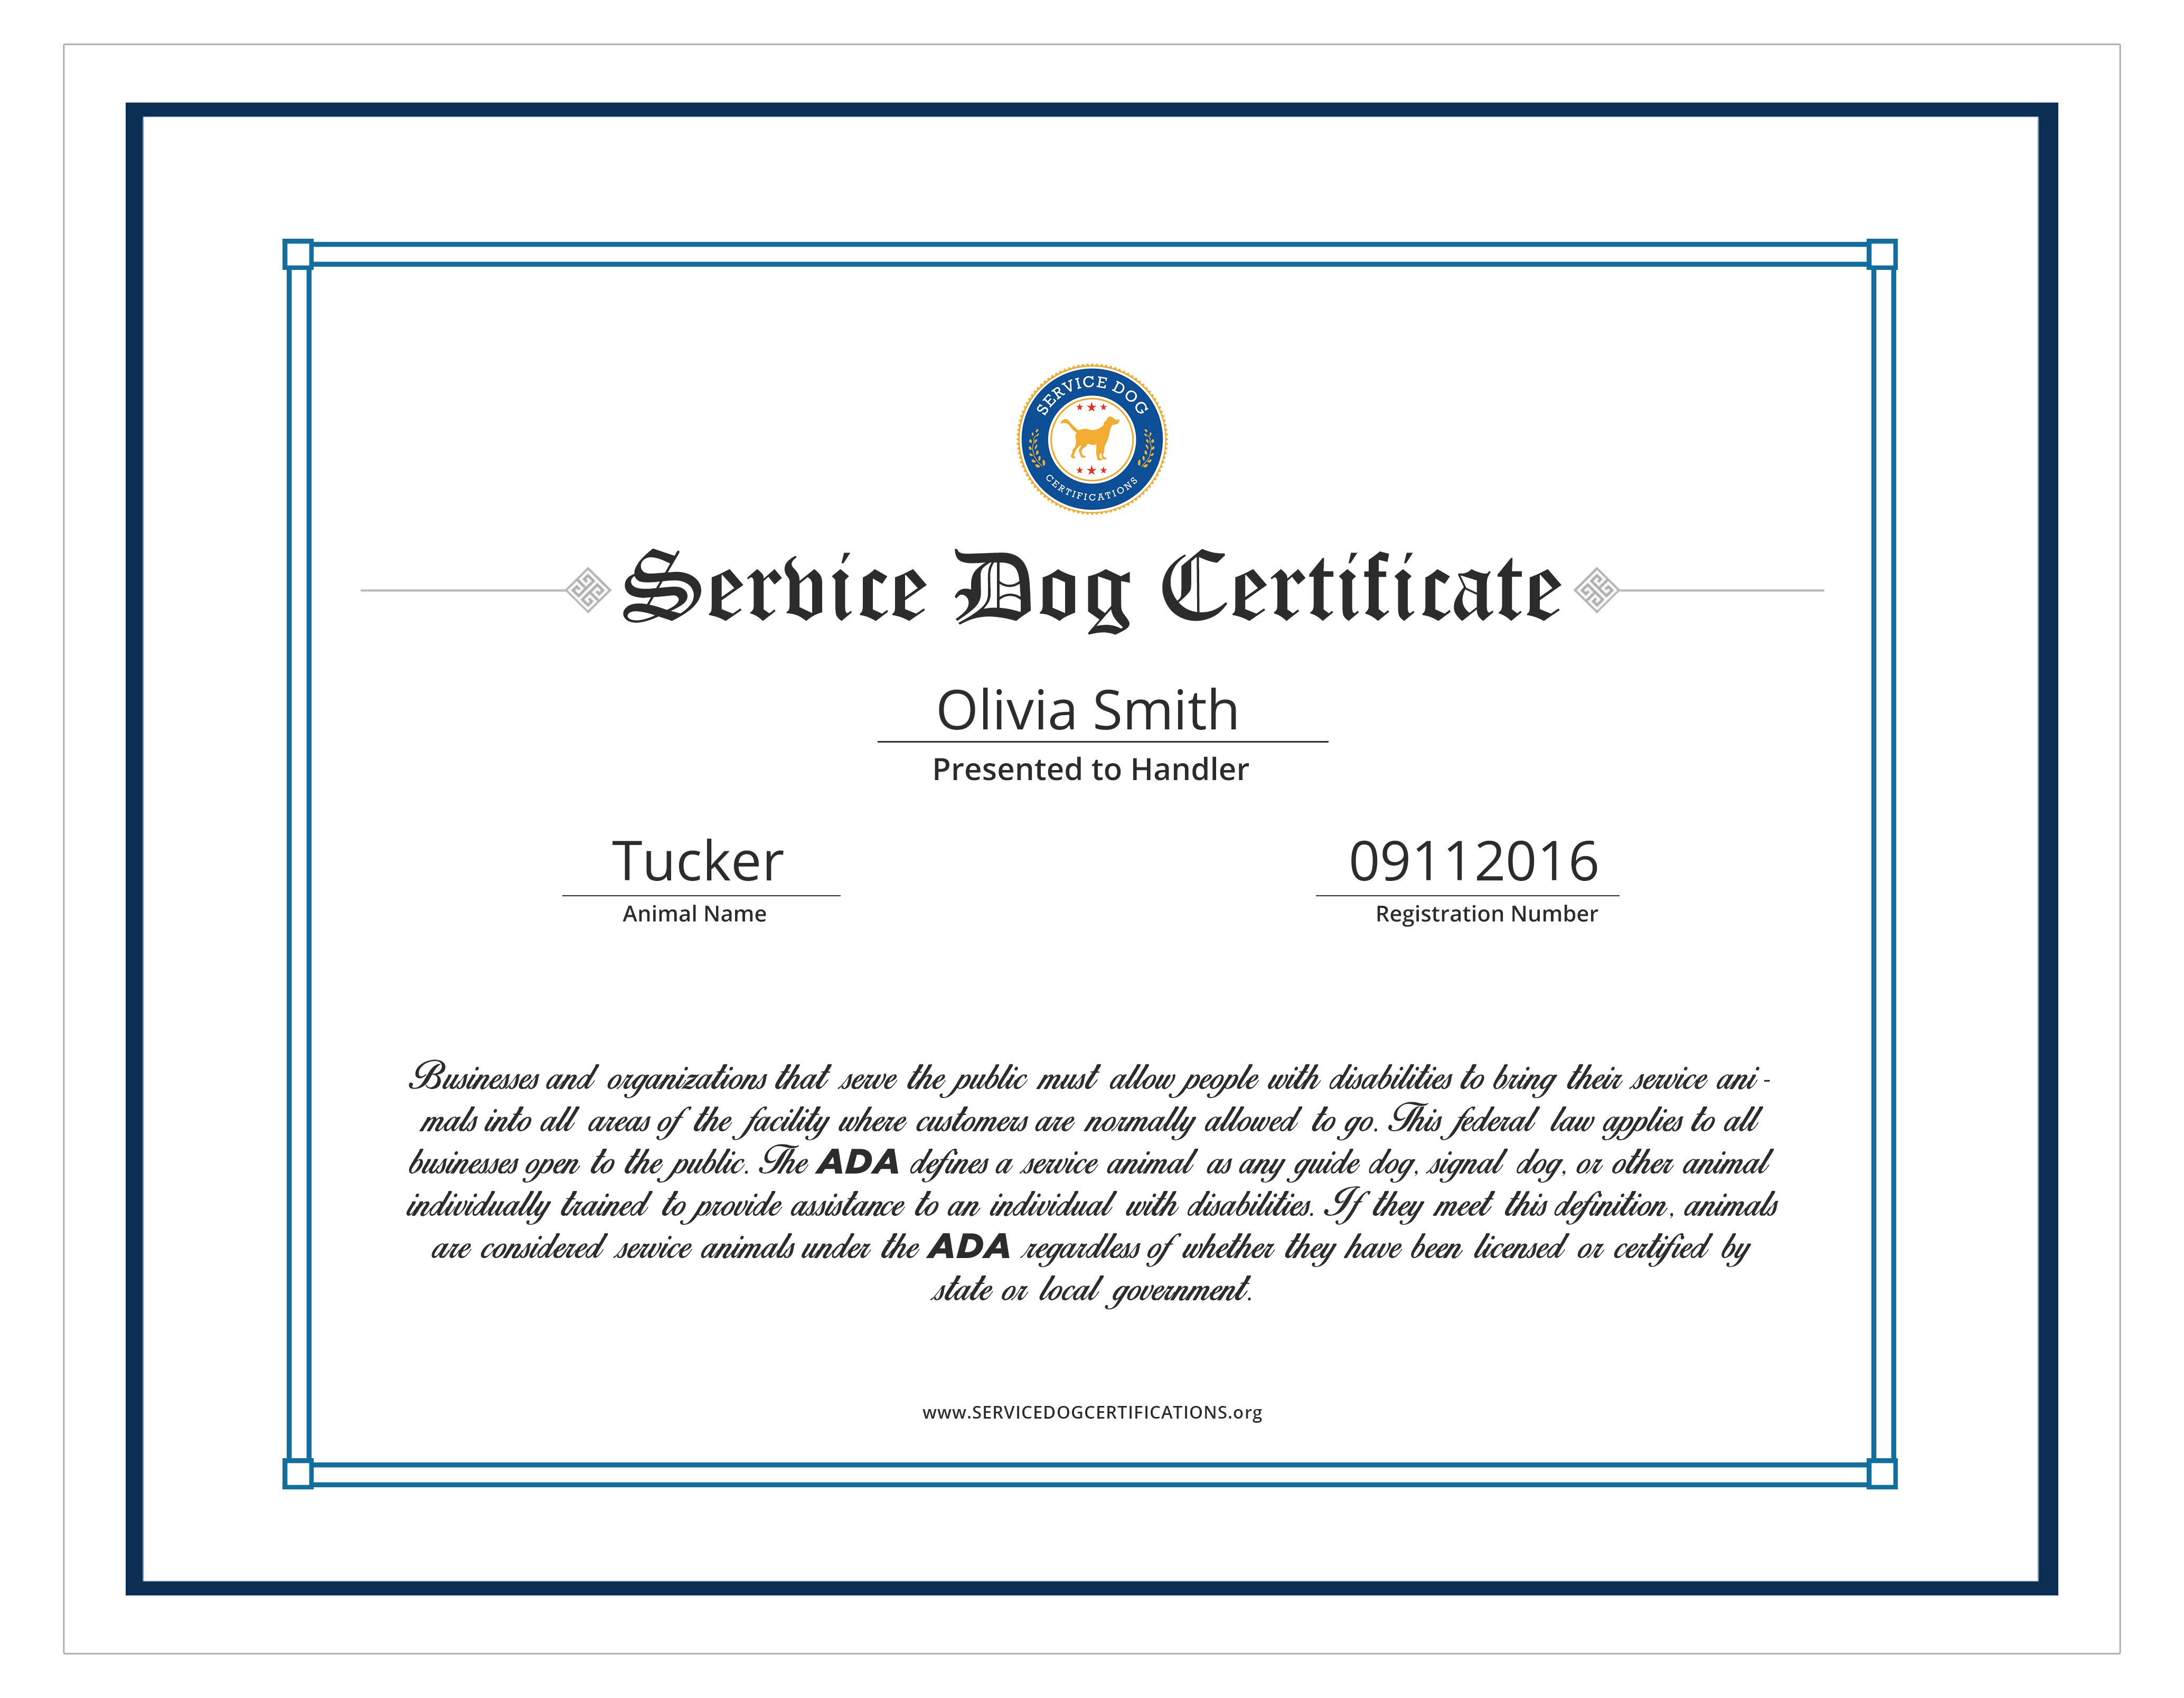 Dog Certificate Mock Fresh Free Service Dog Certification Download throughout Service Dog Certificate Template